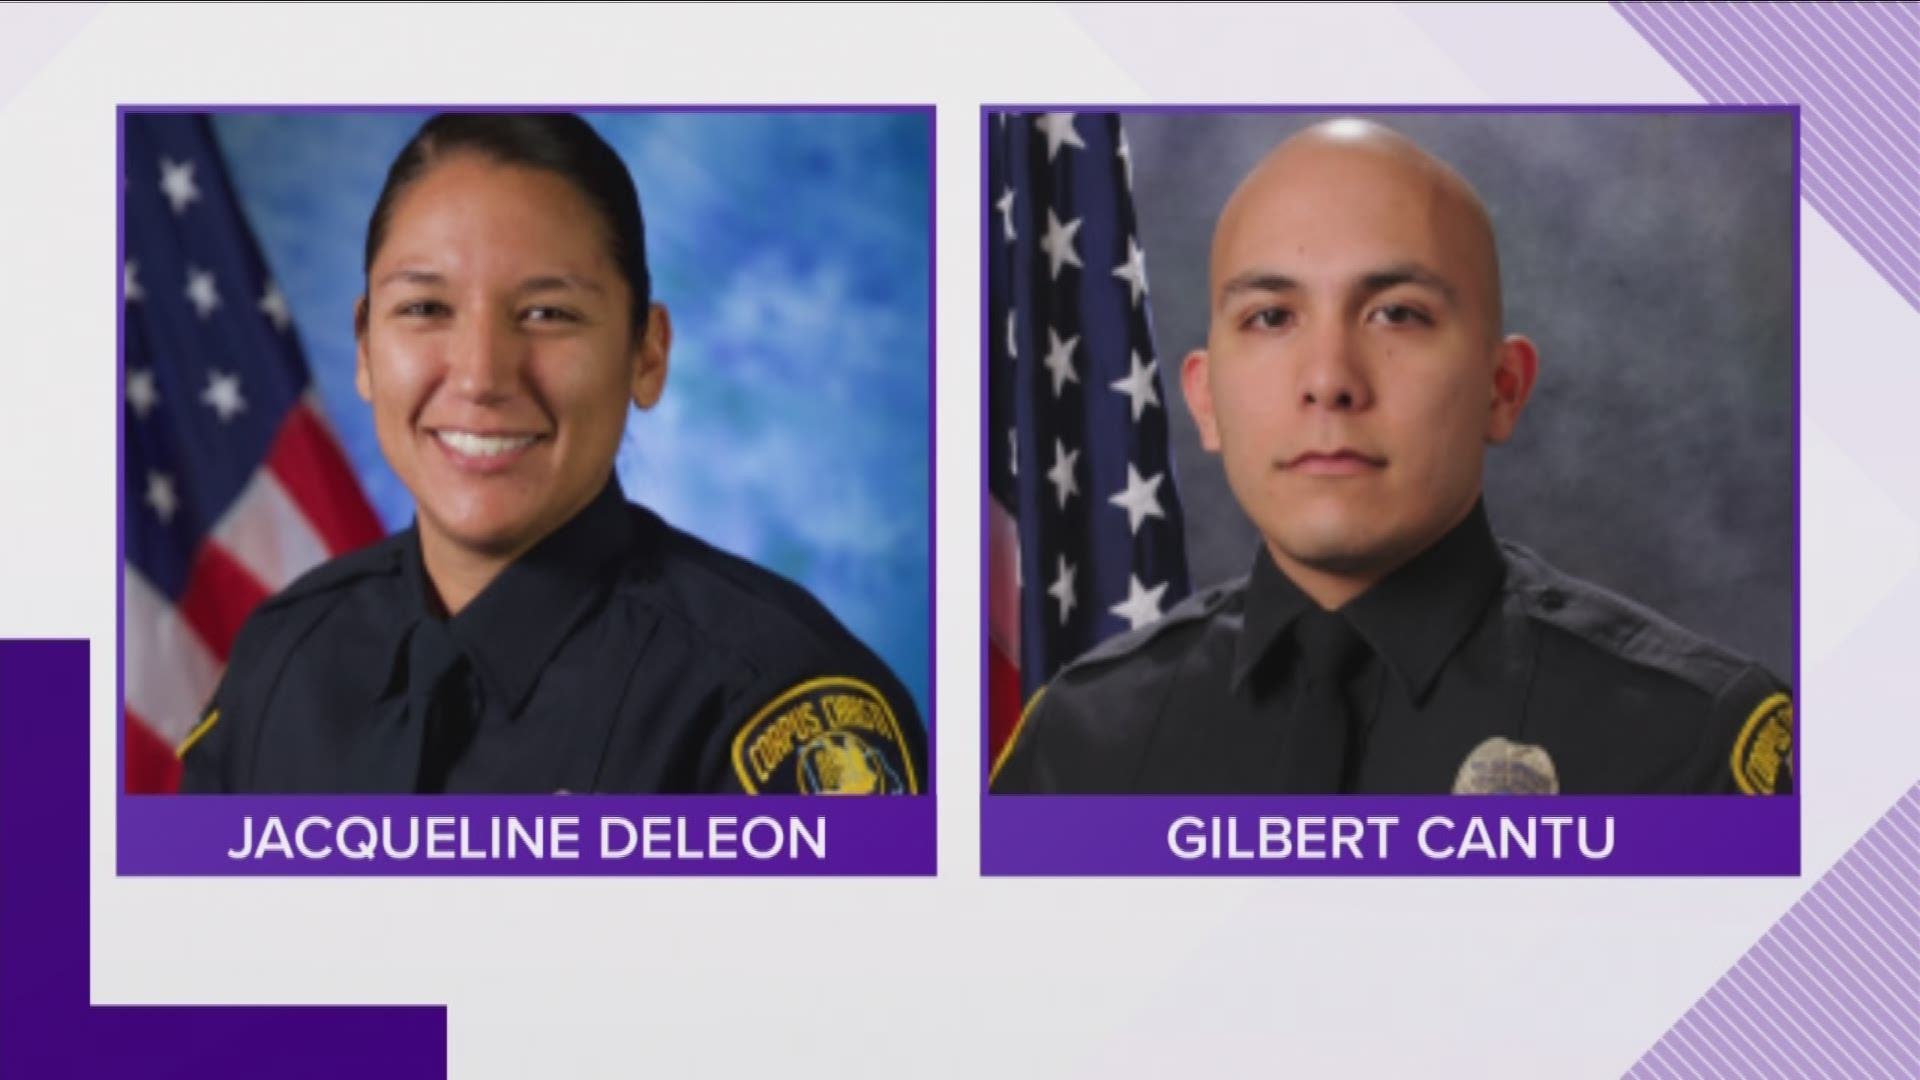 Senior Officer Gilbert Cantu and Officer Jacqueline Deleon have both been placed on paid administrative leave.